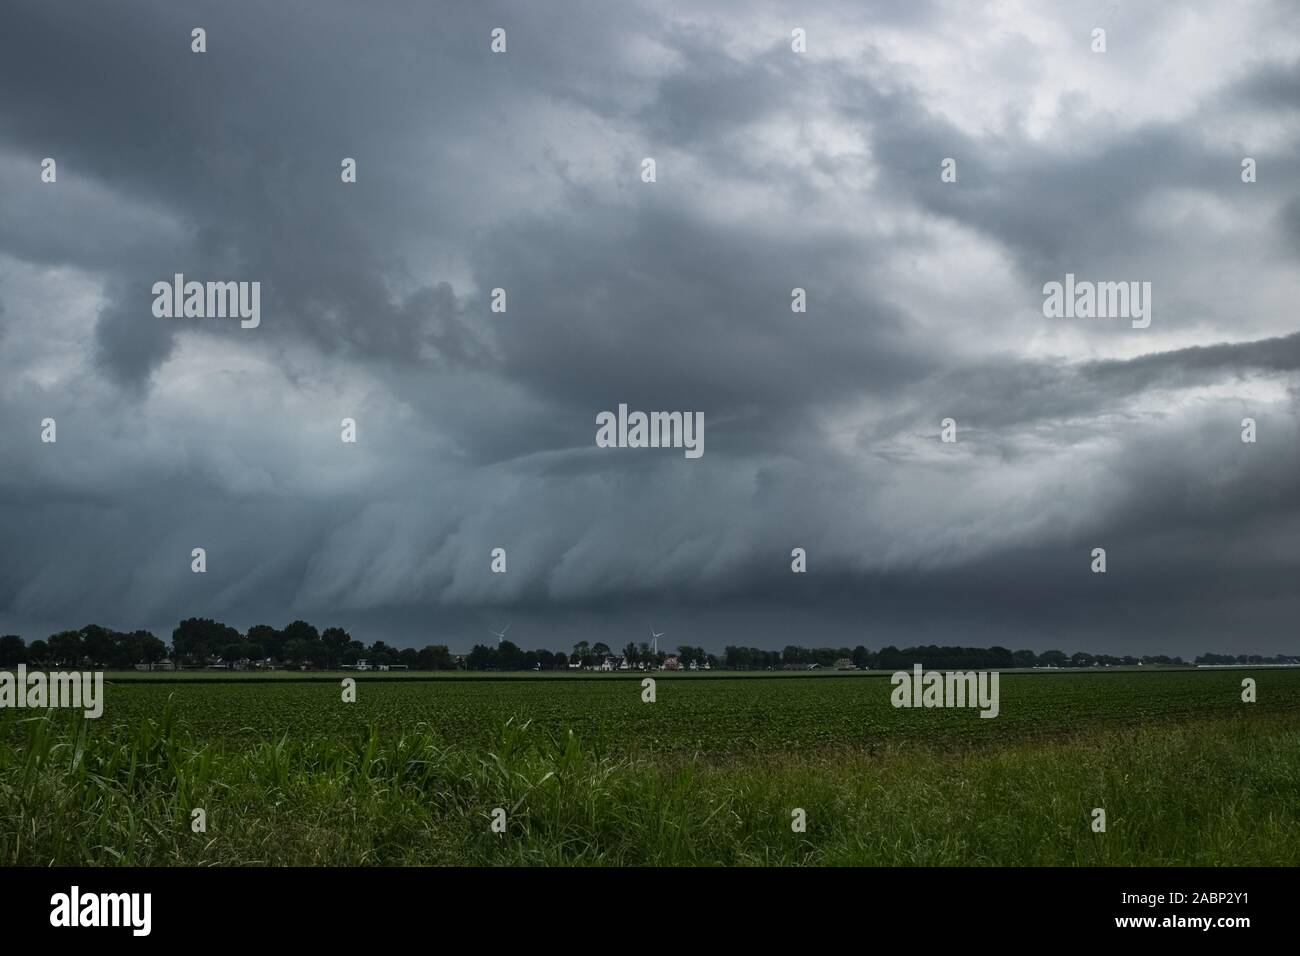 Shelfcloud of a severe thunderstorm over the wide open countryside of The Netherlands, Europe. Severe weather is to be expected from this storm. Stock Photo